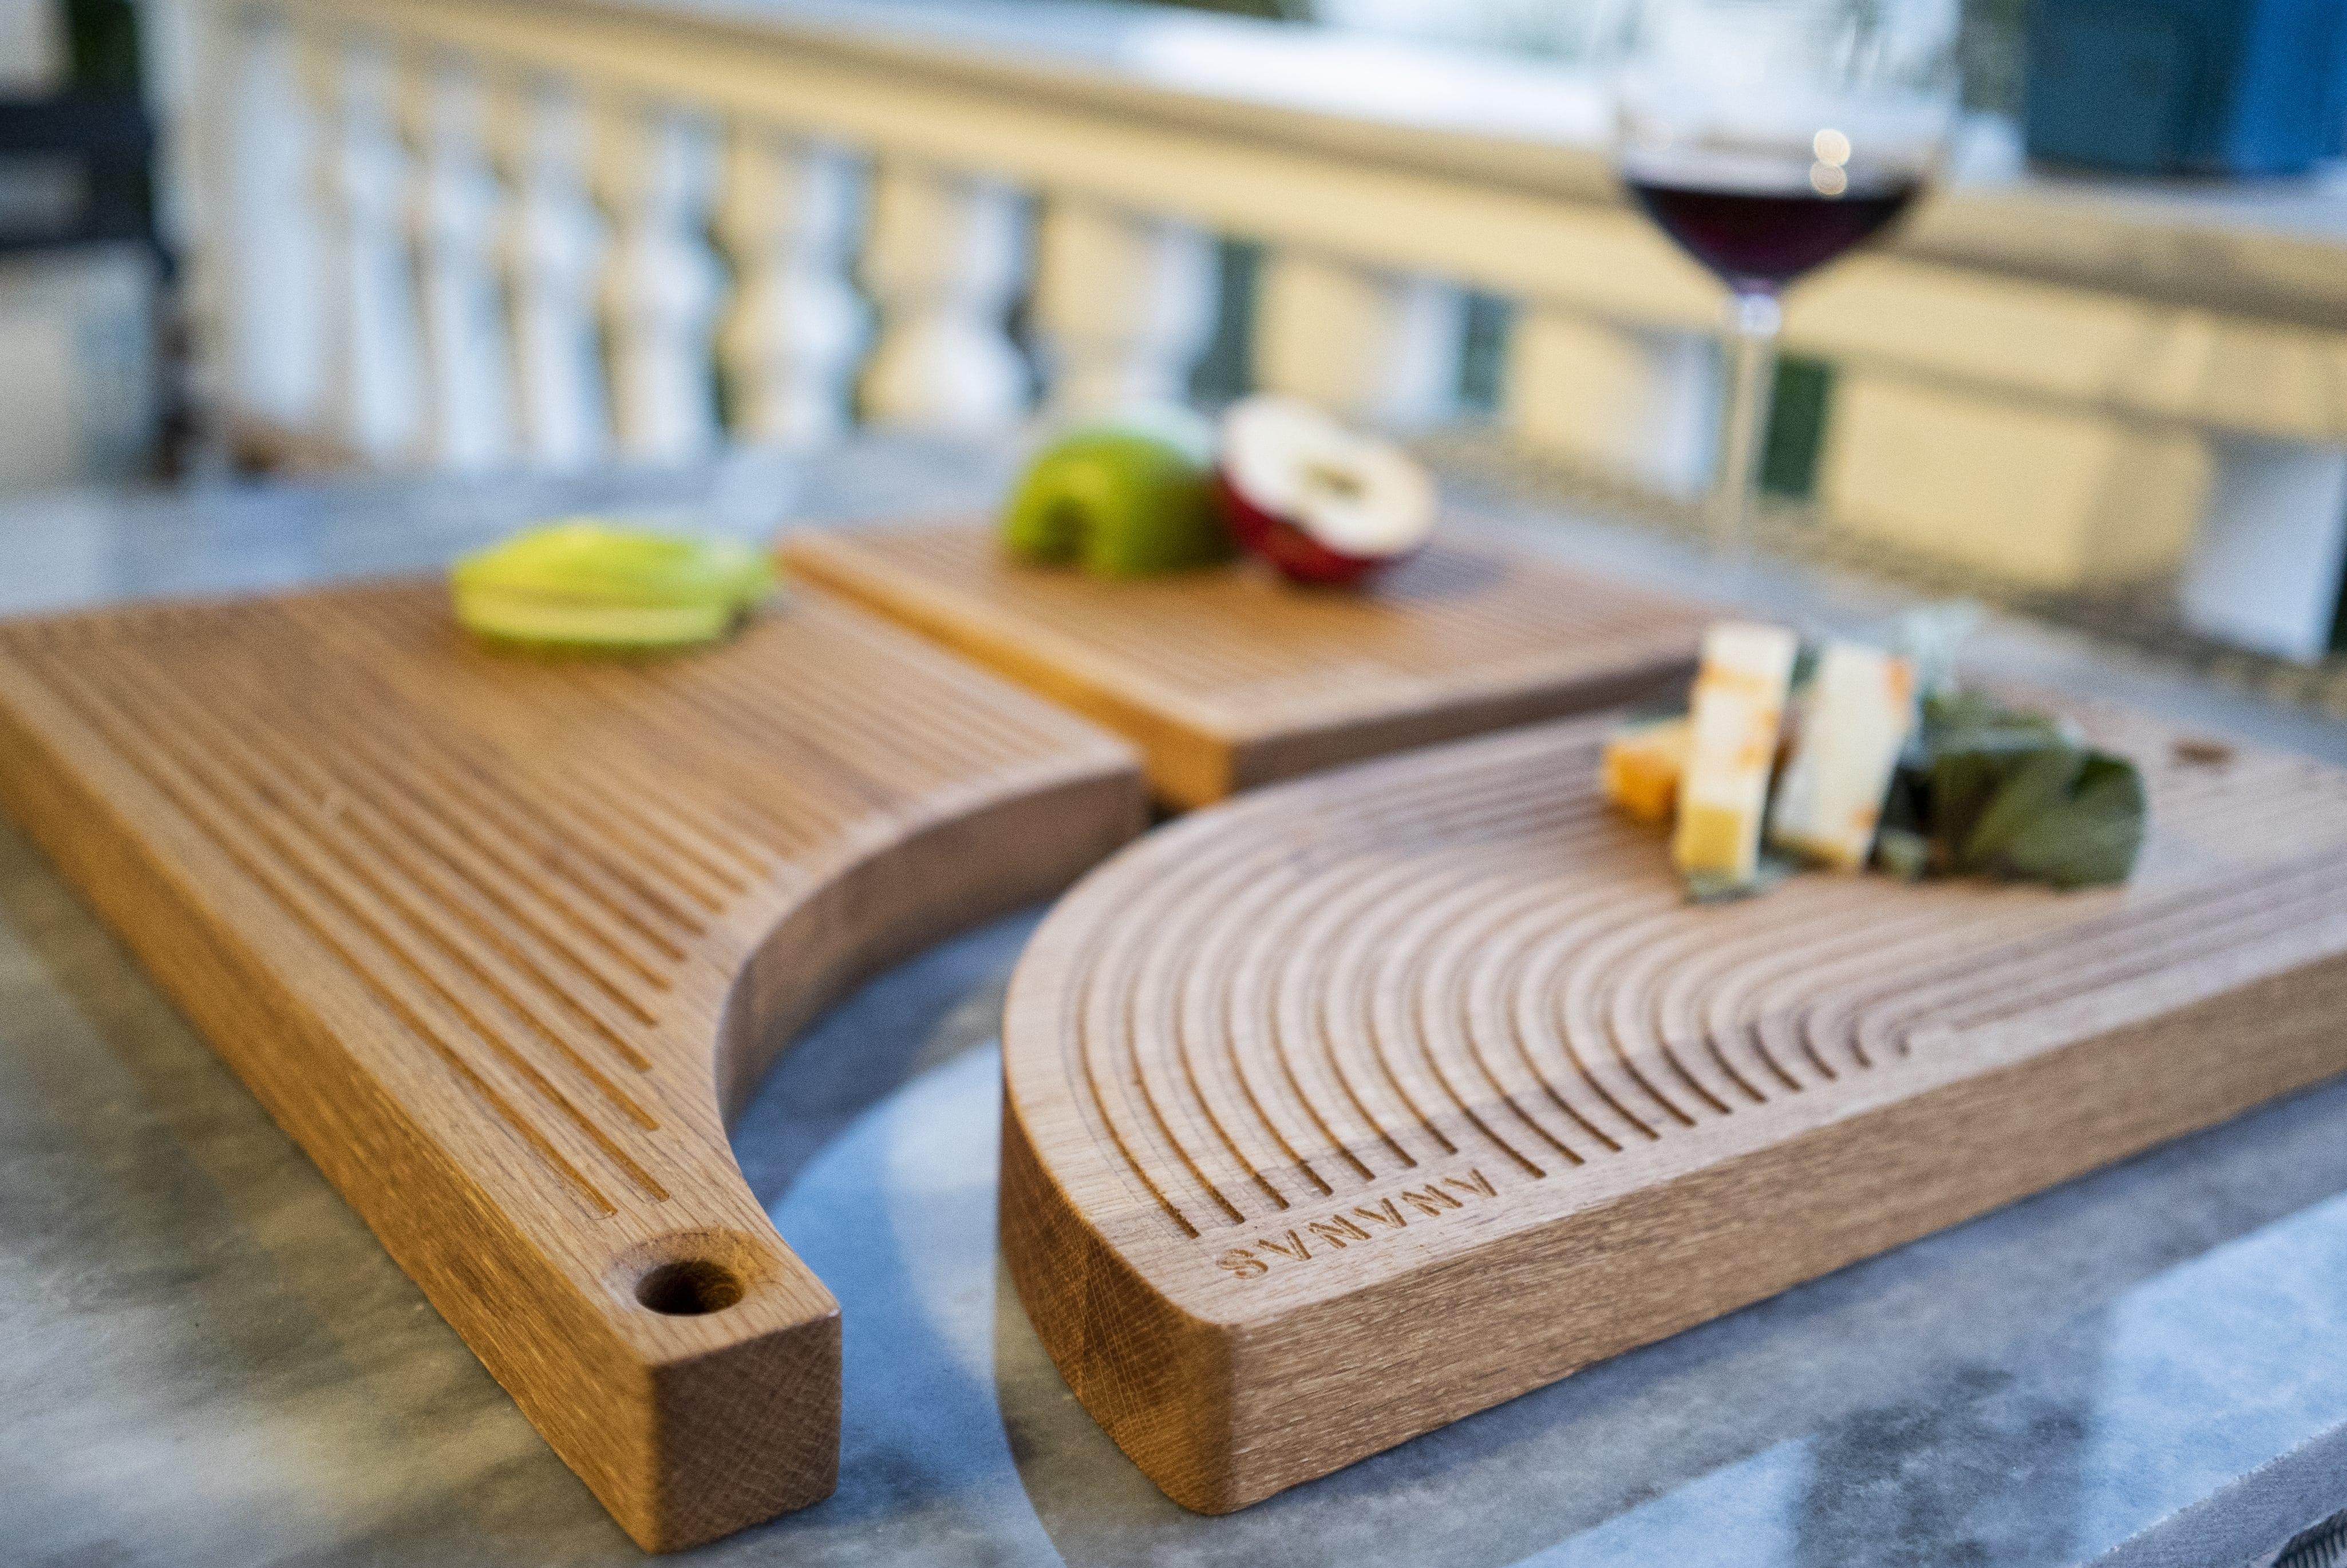 Dada has been designed for service and presentation and is made of solid oak wood. The arrangement of the grooves on their surface prevents the juices of food from dripping. They are ideal for the presentation of fish, cheese, and meat on your